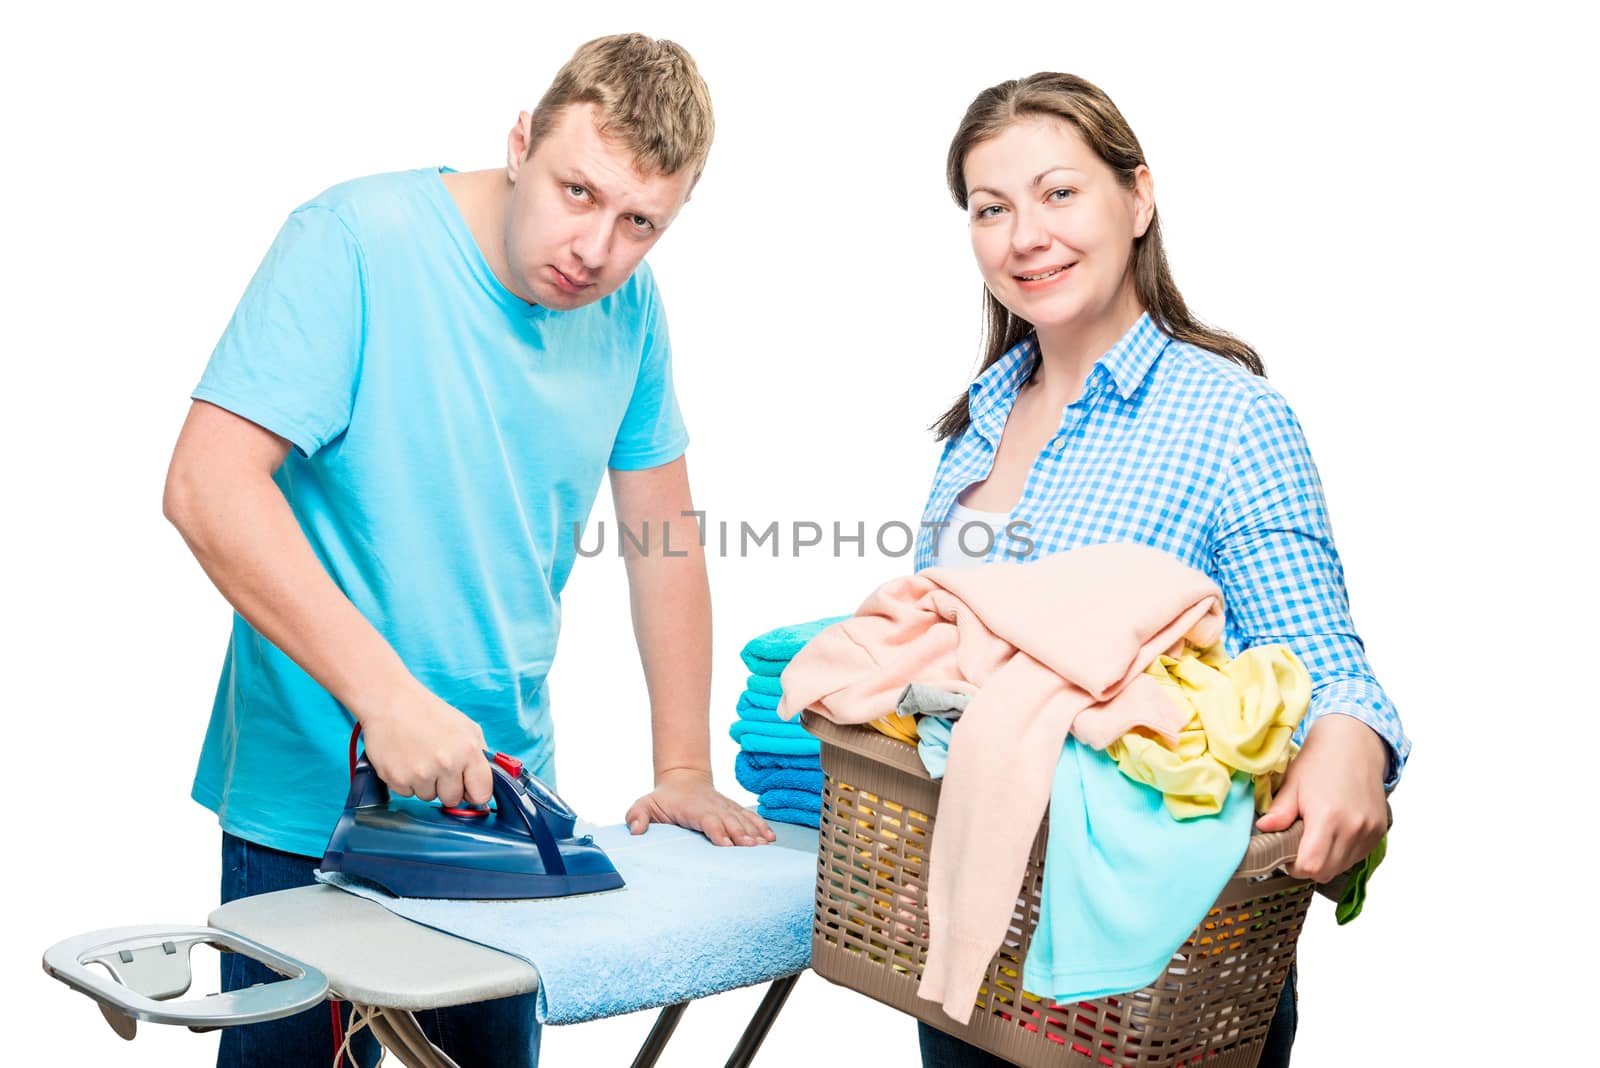 homework, the husband ironing things with an iron on a white background